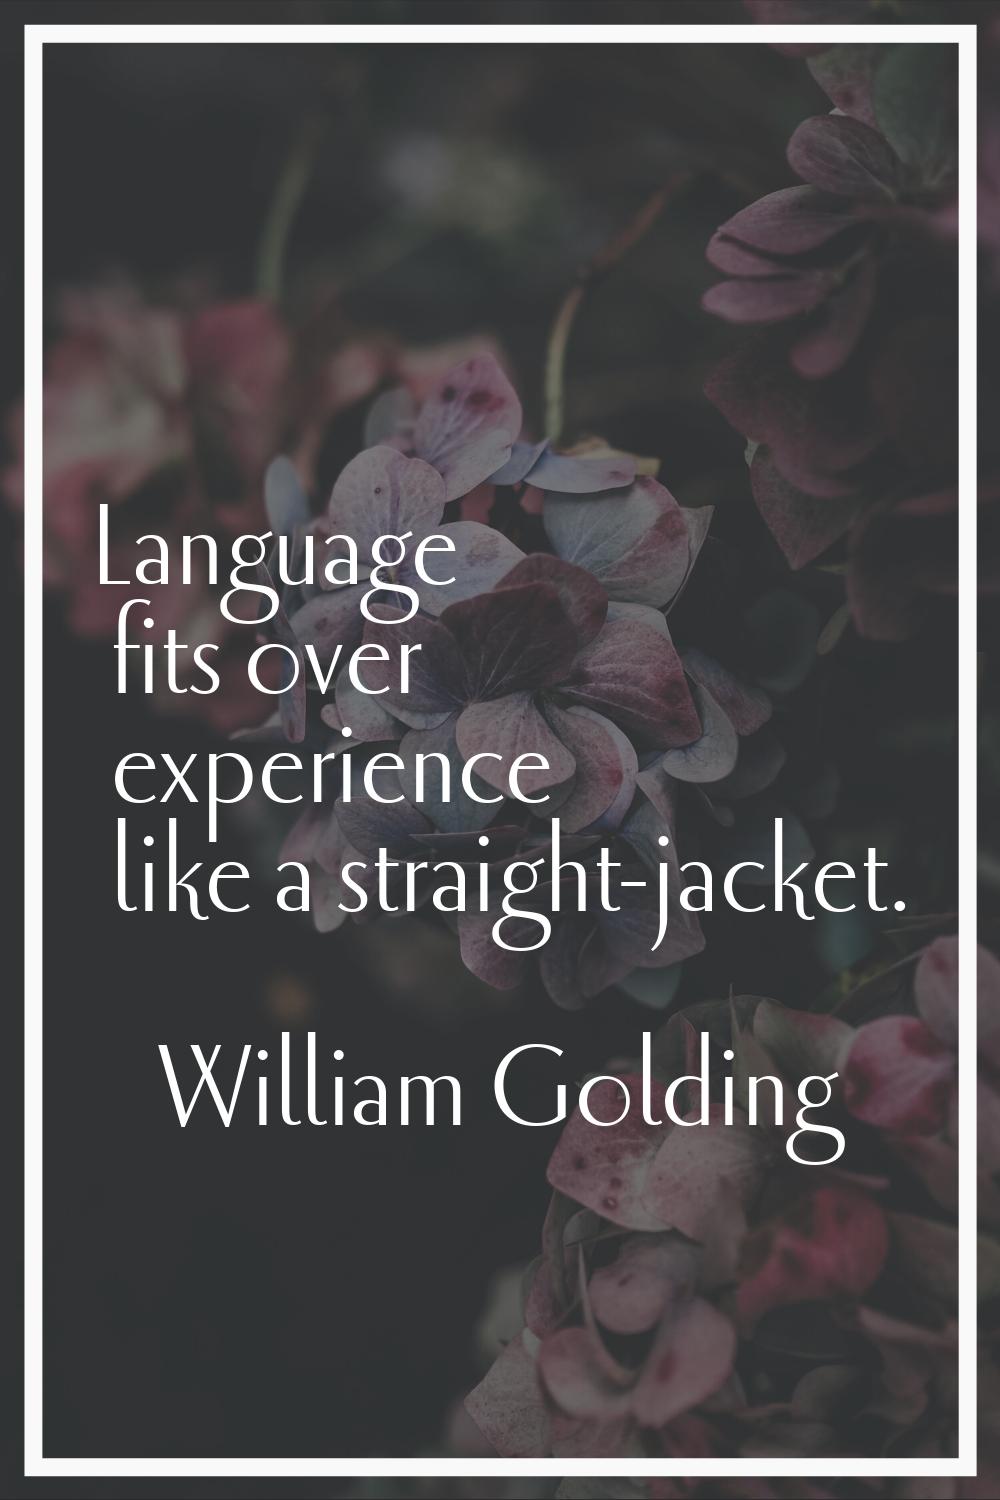 Language fits over experience like a straight-jacket.